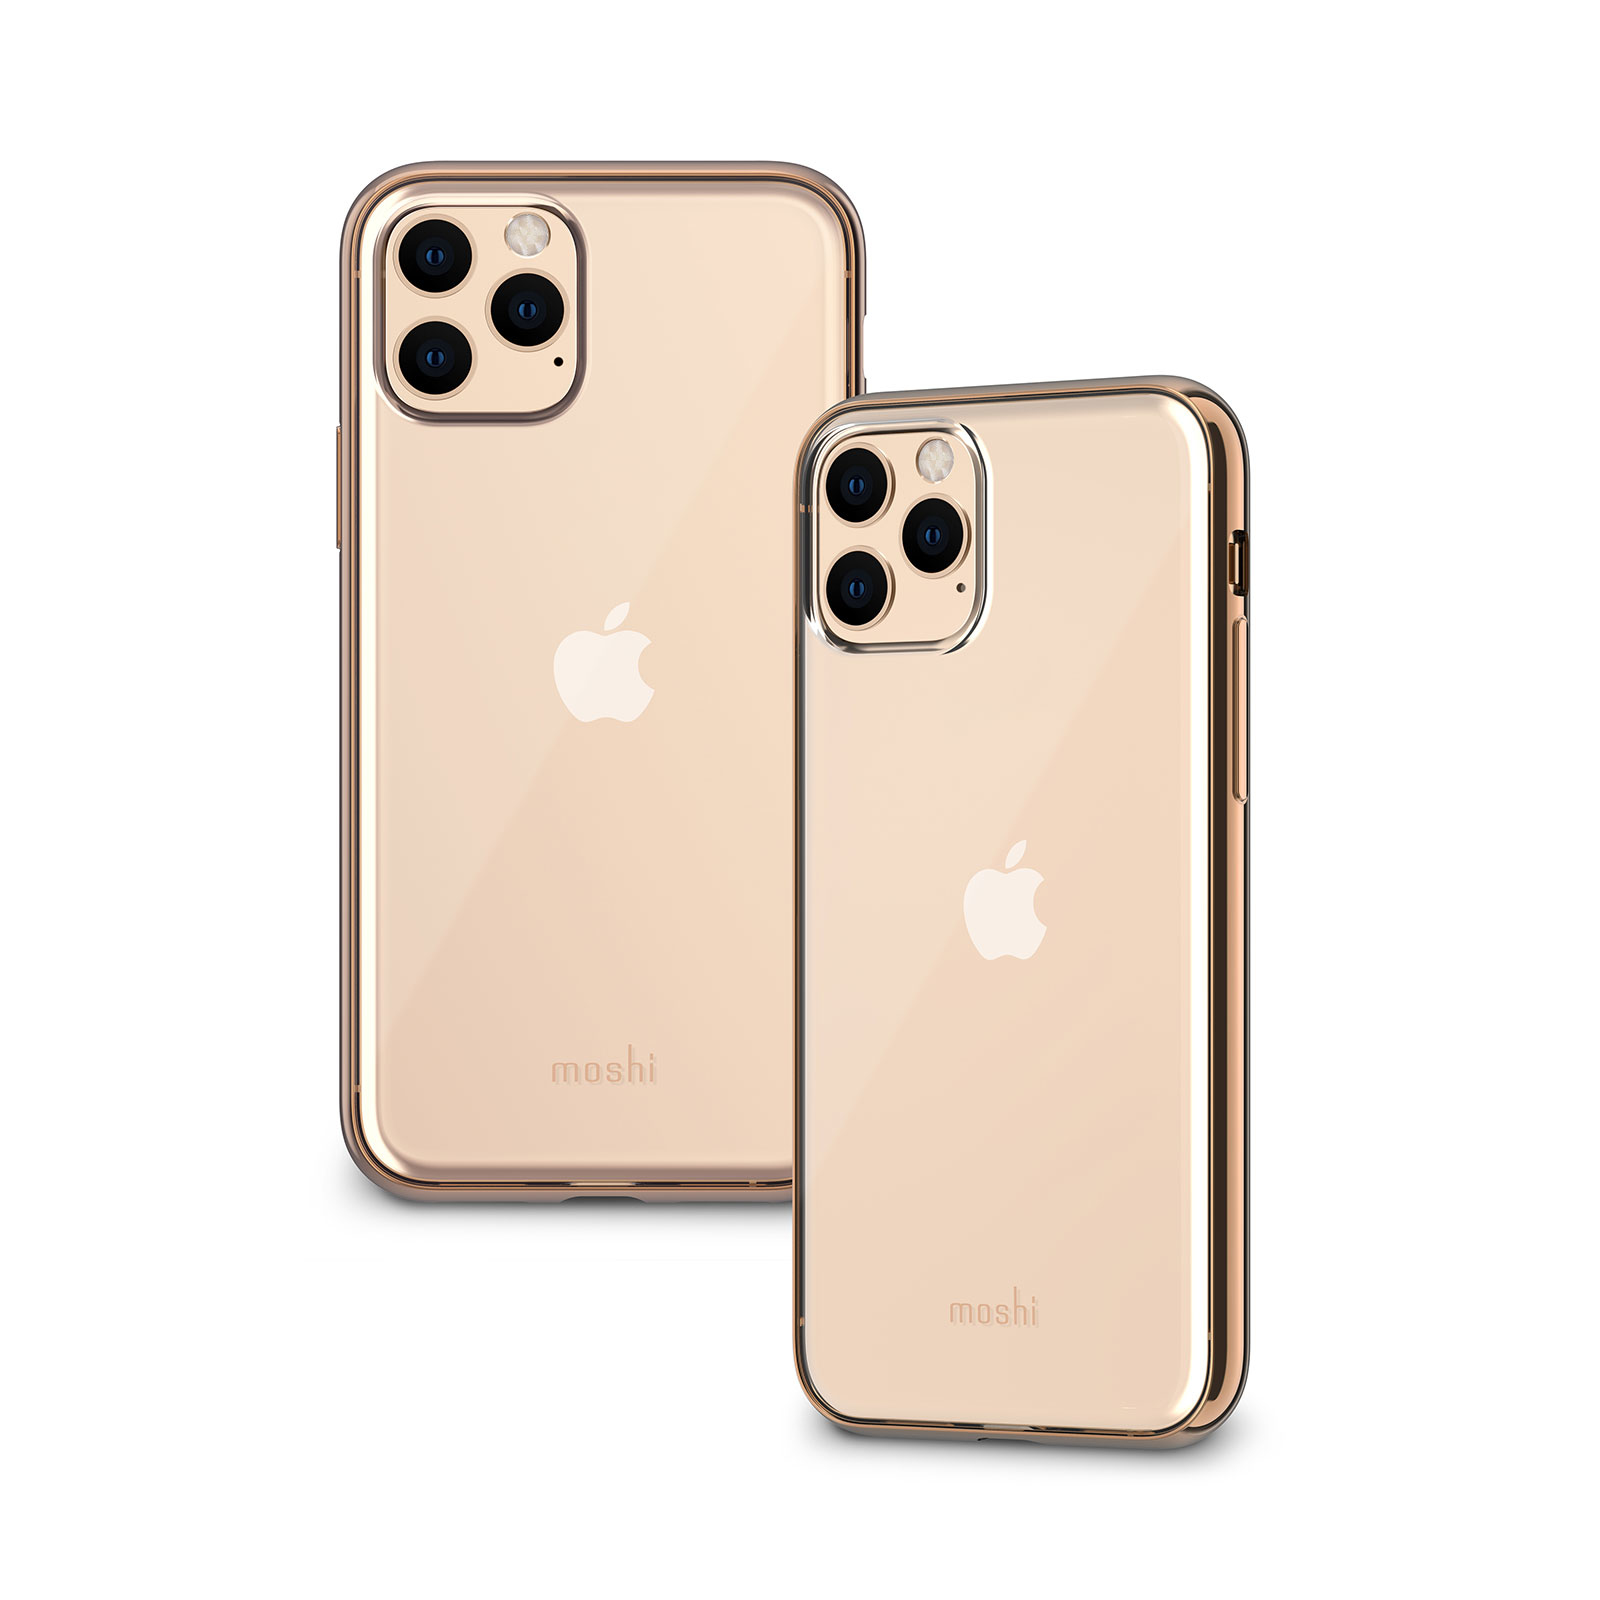 Moshi Vitros Champagne Gold Case for iPhone 11 Pro